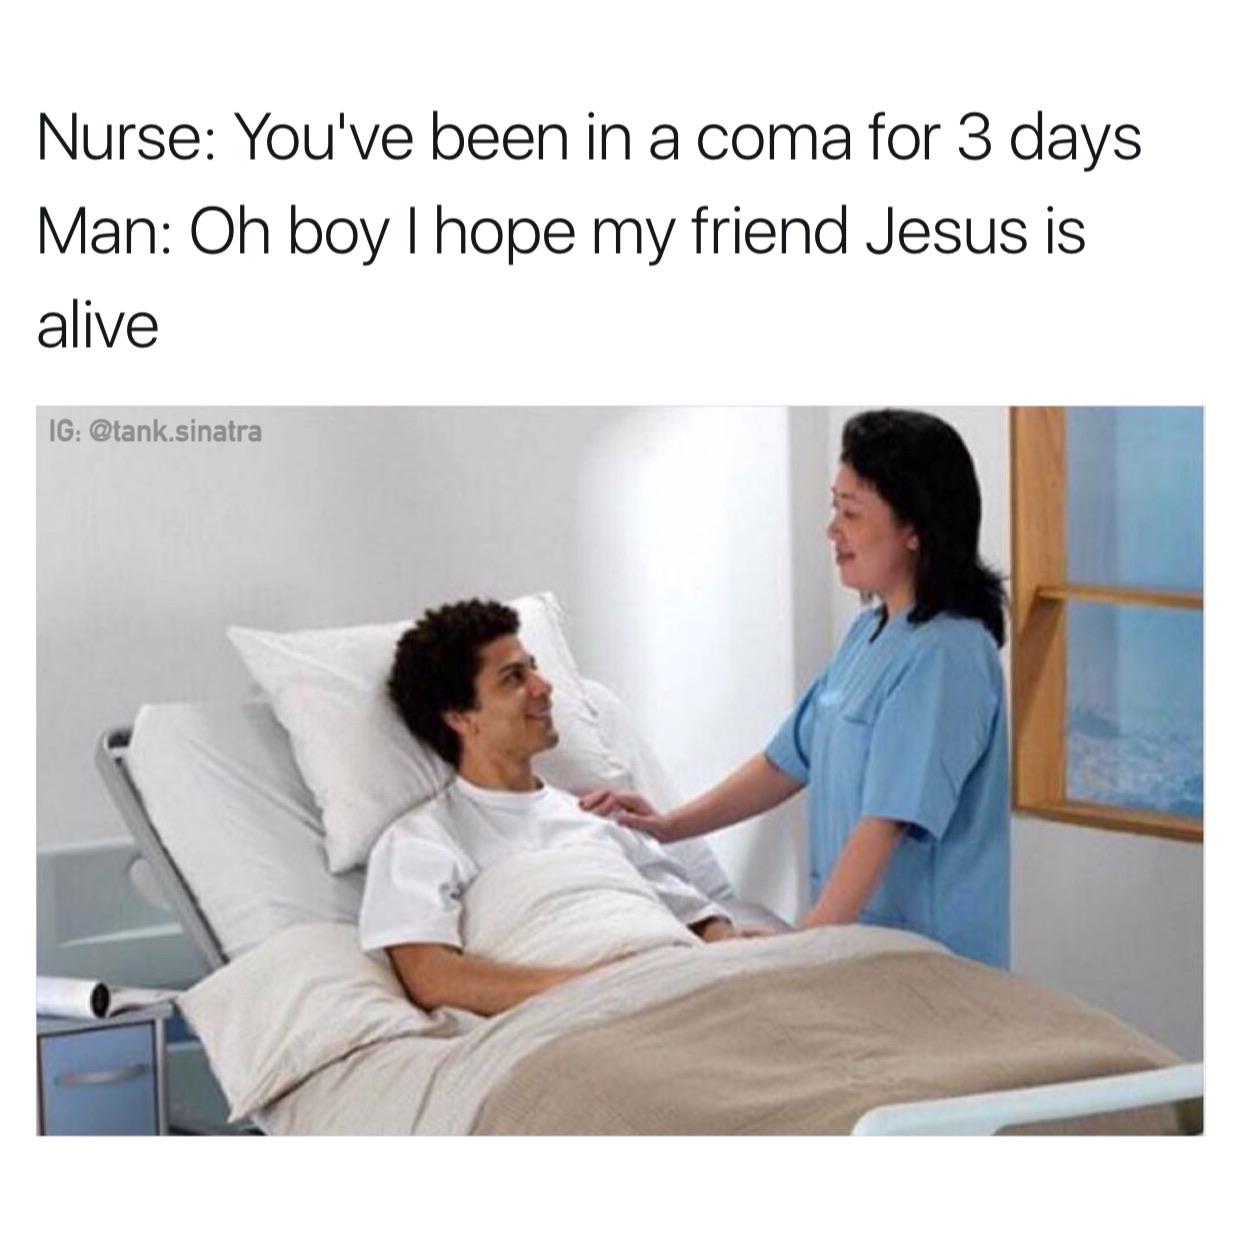 scaramucci meme coma - Nurse You've been in a coma for 3 days Man Oh boy Thope my friend Jesus is alive Ig .sinatra